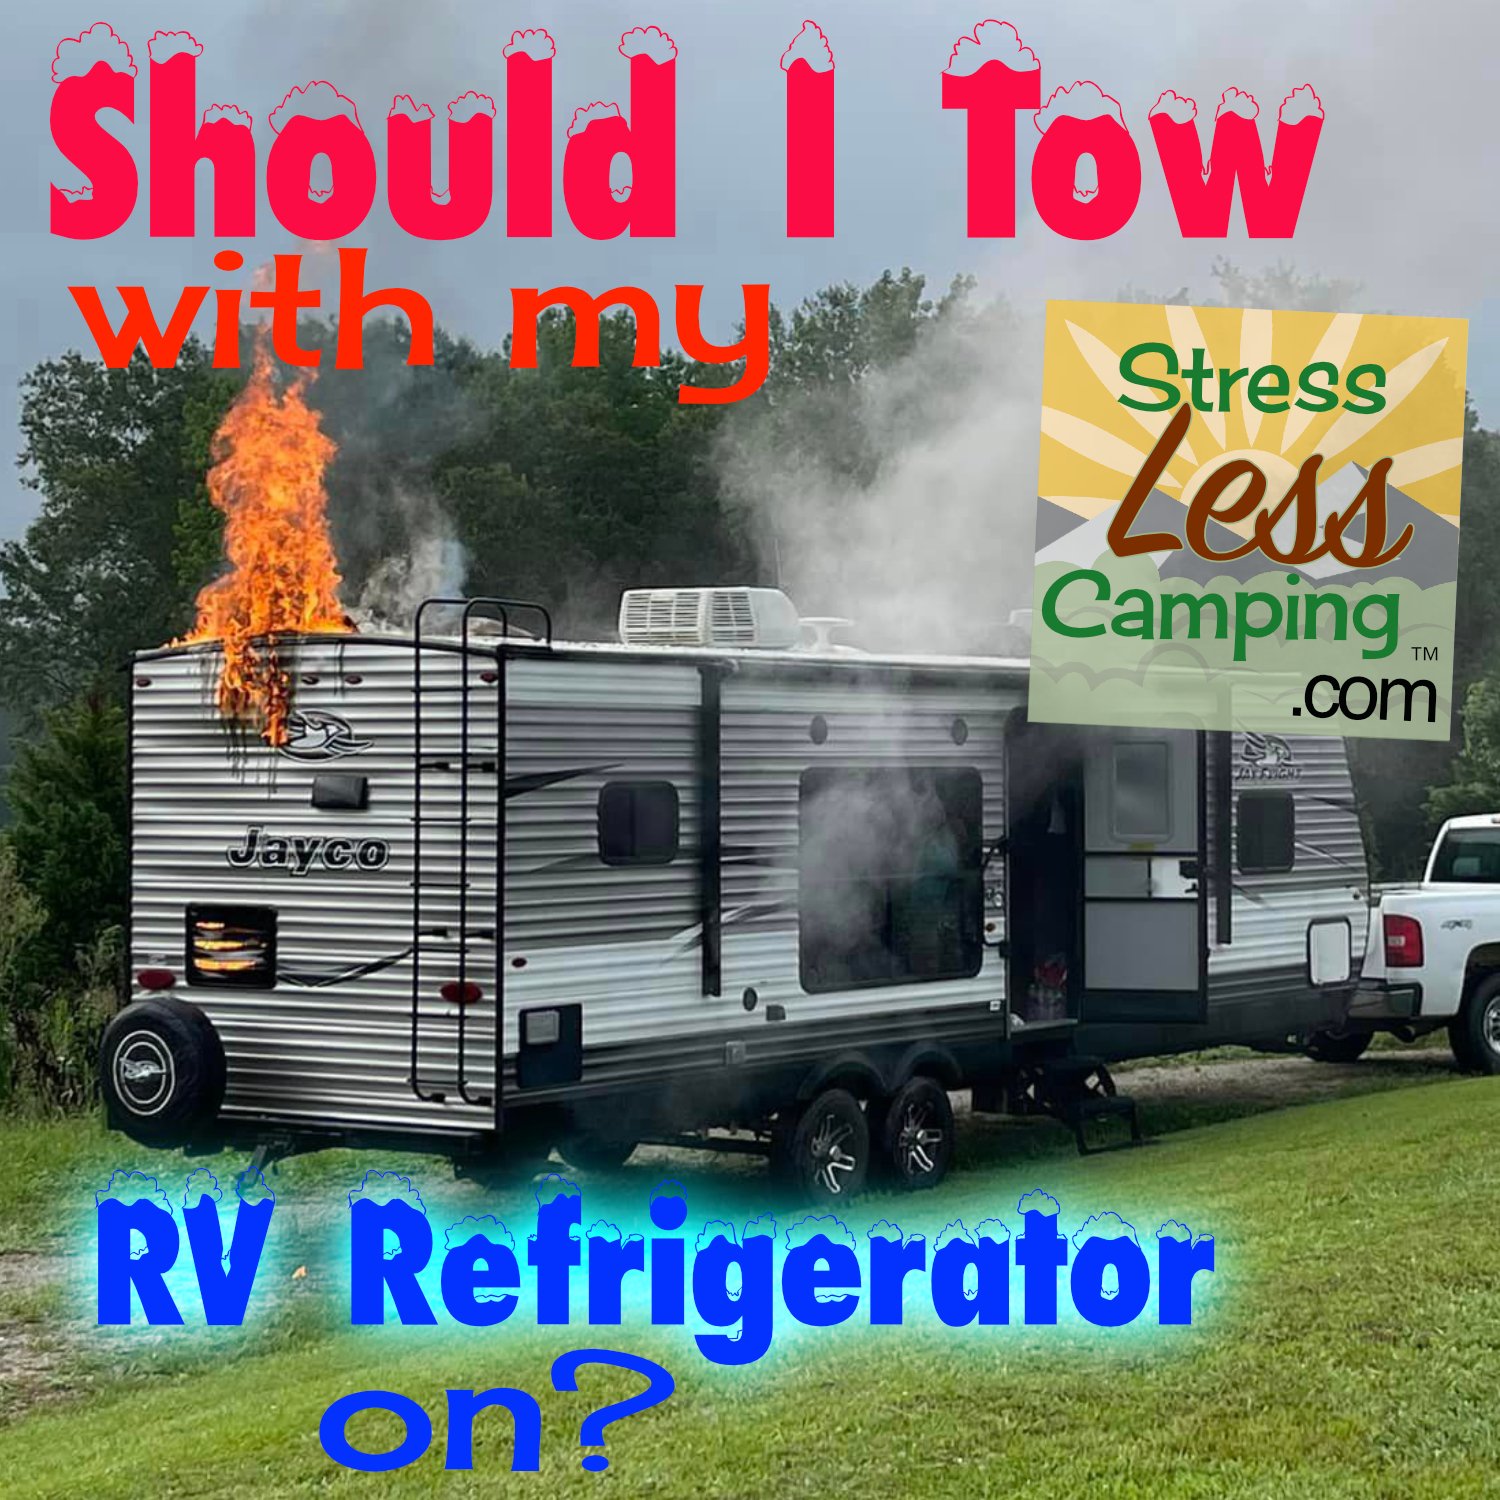 Tips for Keeping your RV Fridge Cold - Unique RV Camping with Harvest Hosts